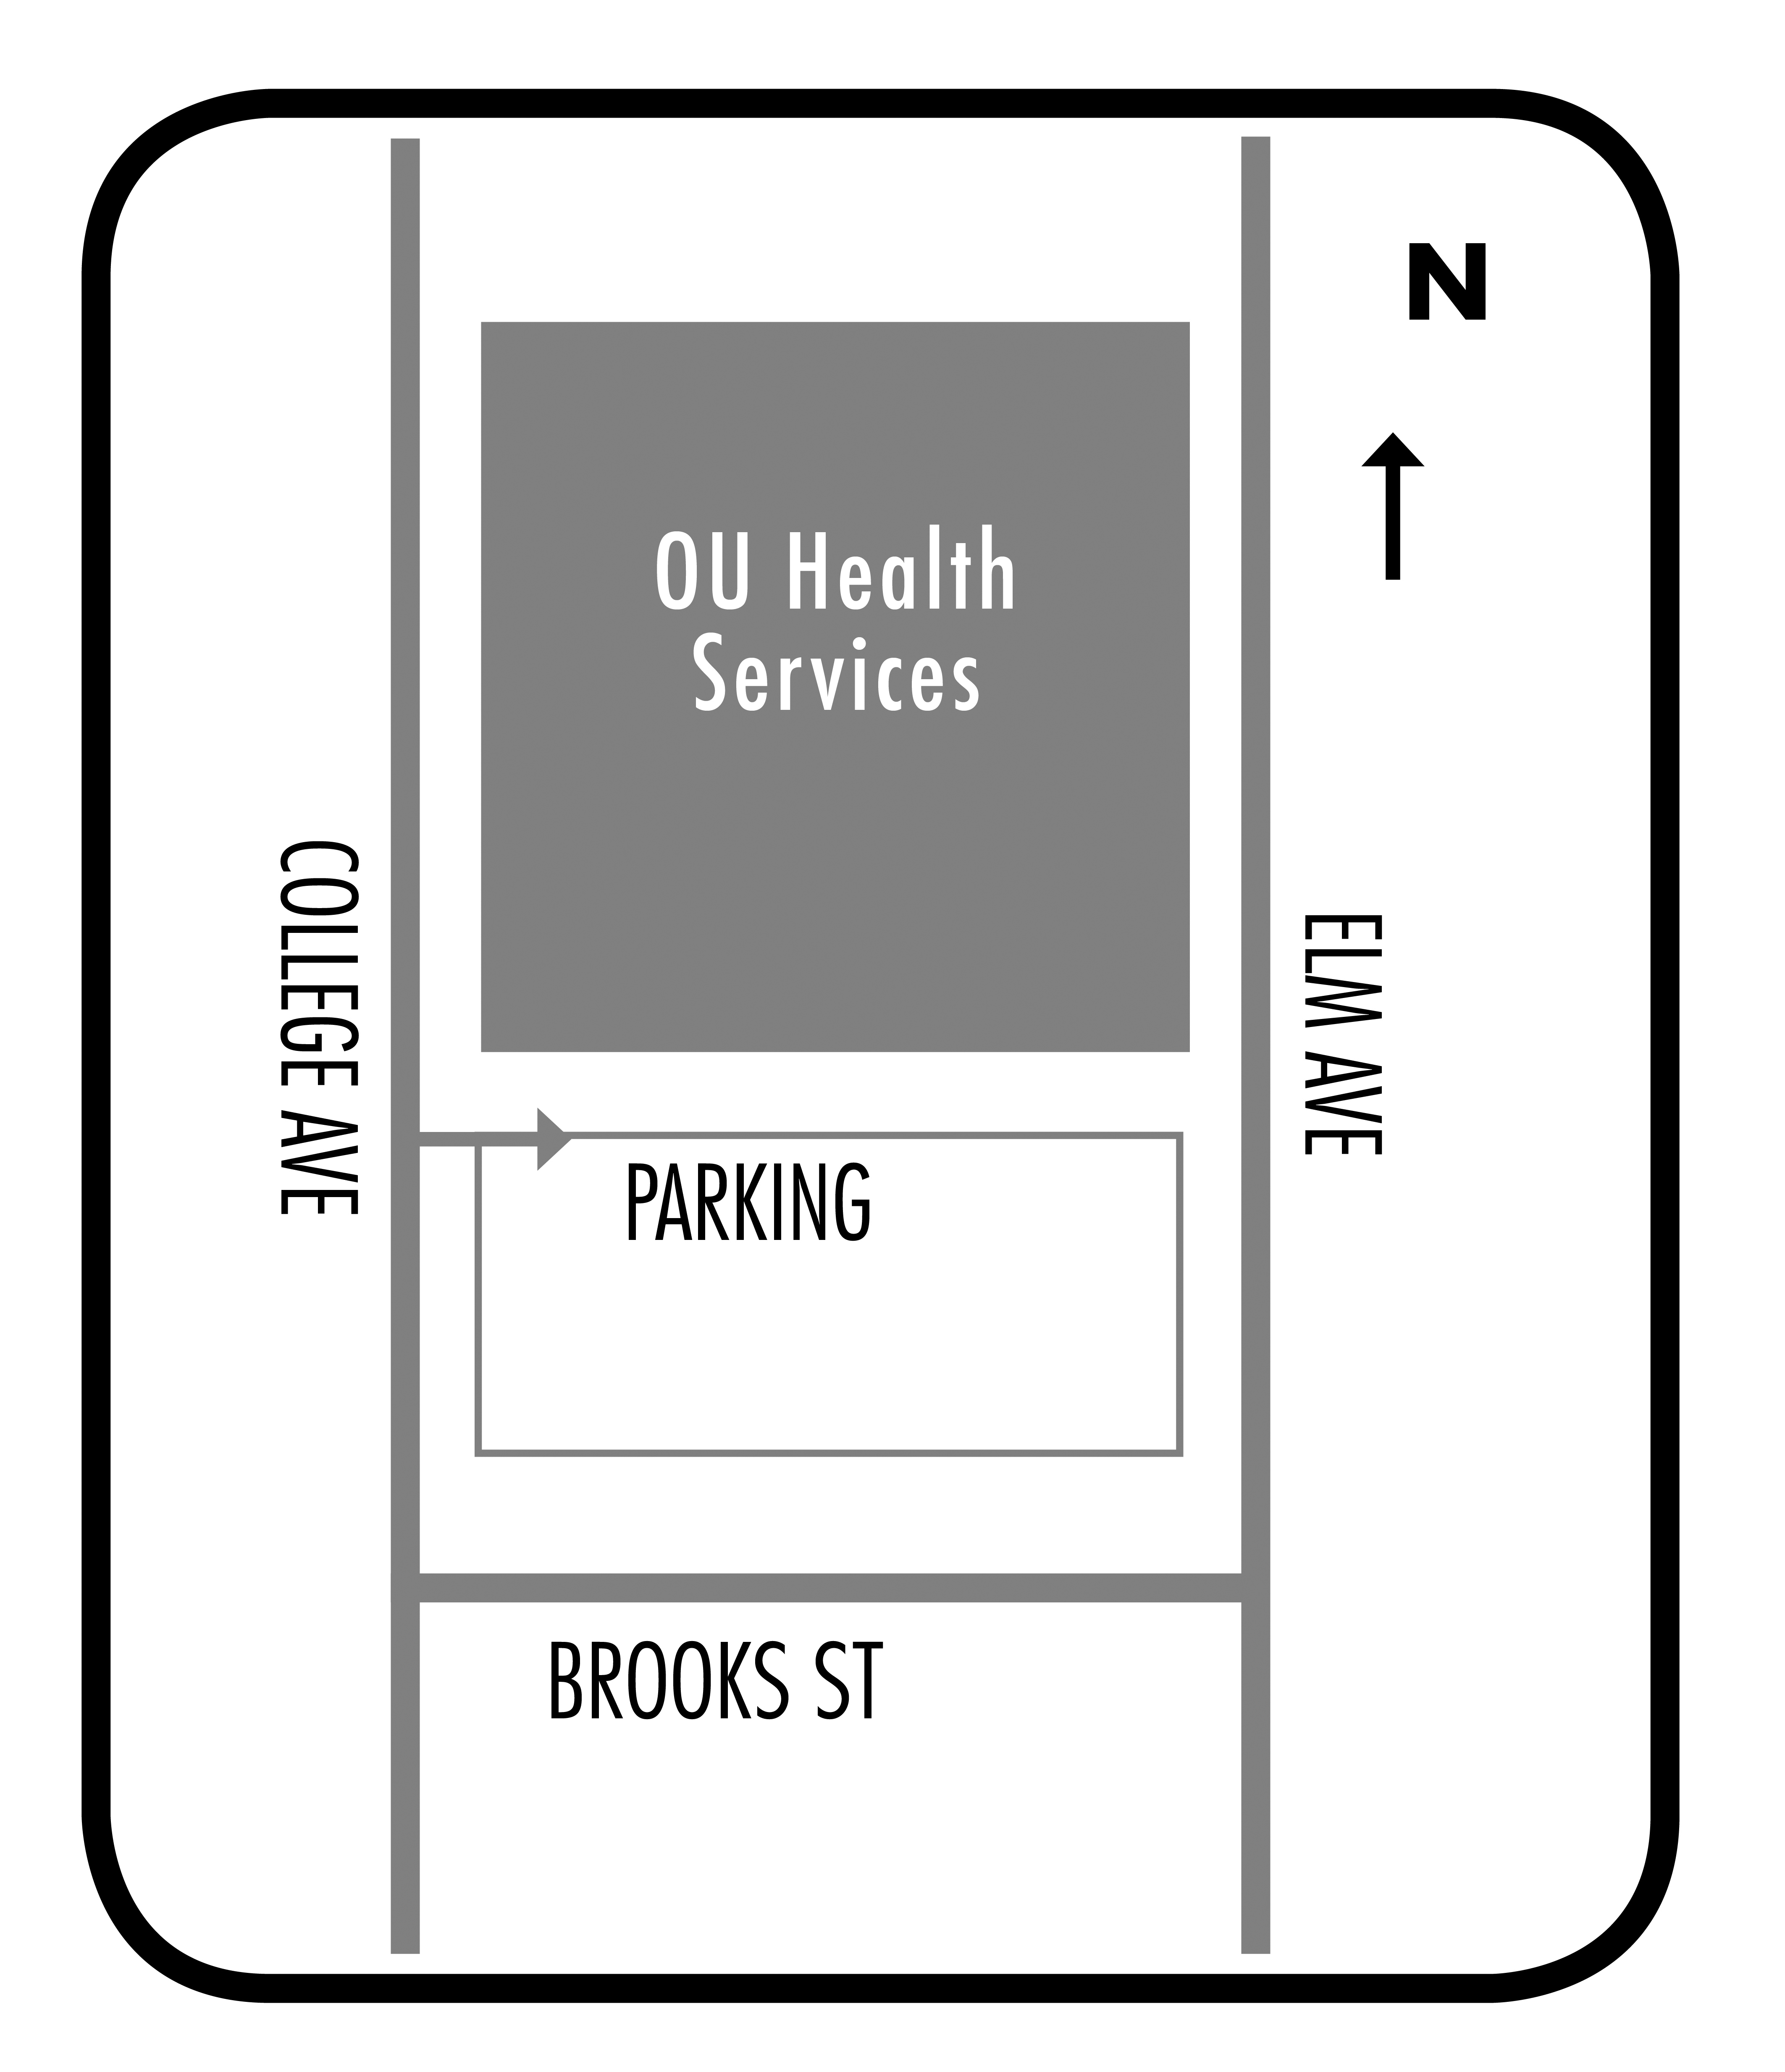 OUHS is located on the corner of Elm Avenue and Brooks Street.